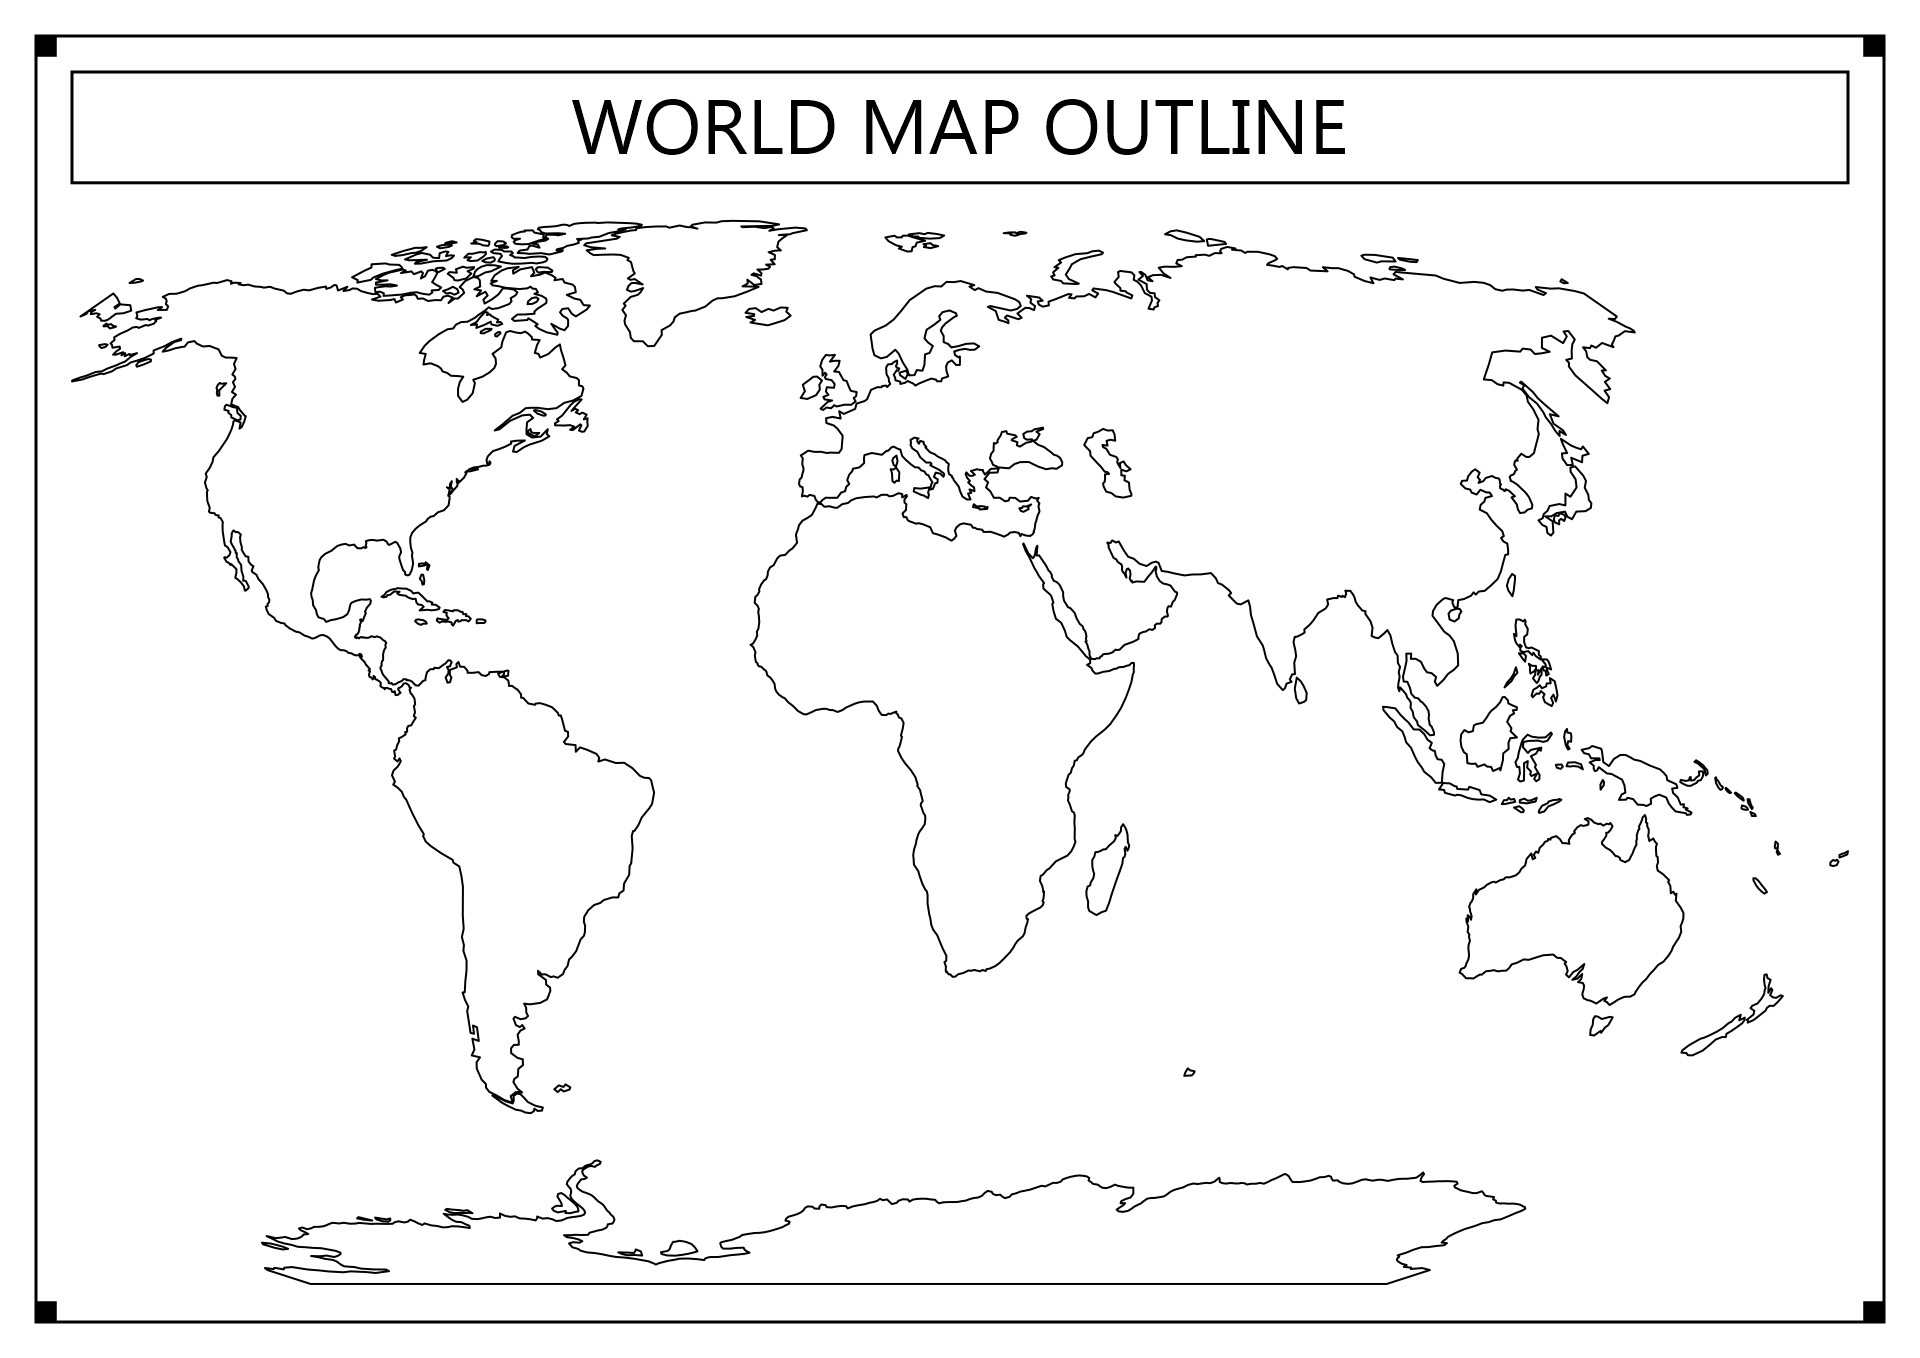 14 Blank Continents And Oceans Worksheets Free Pdf At